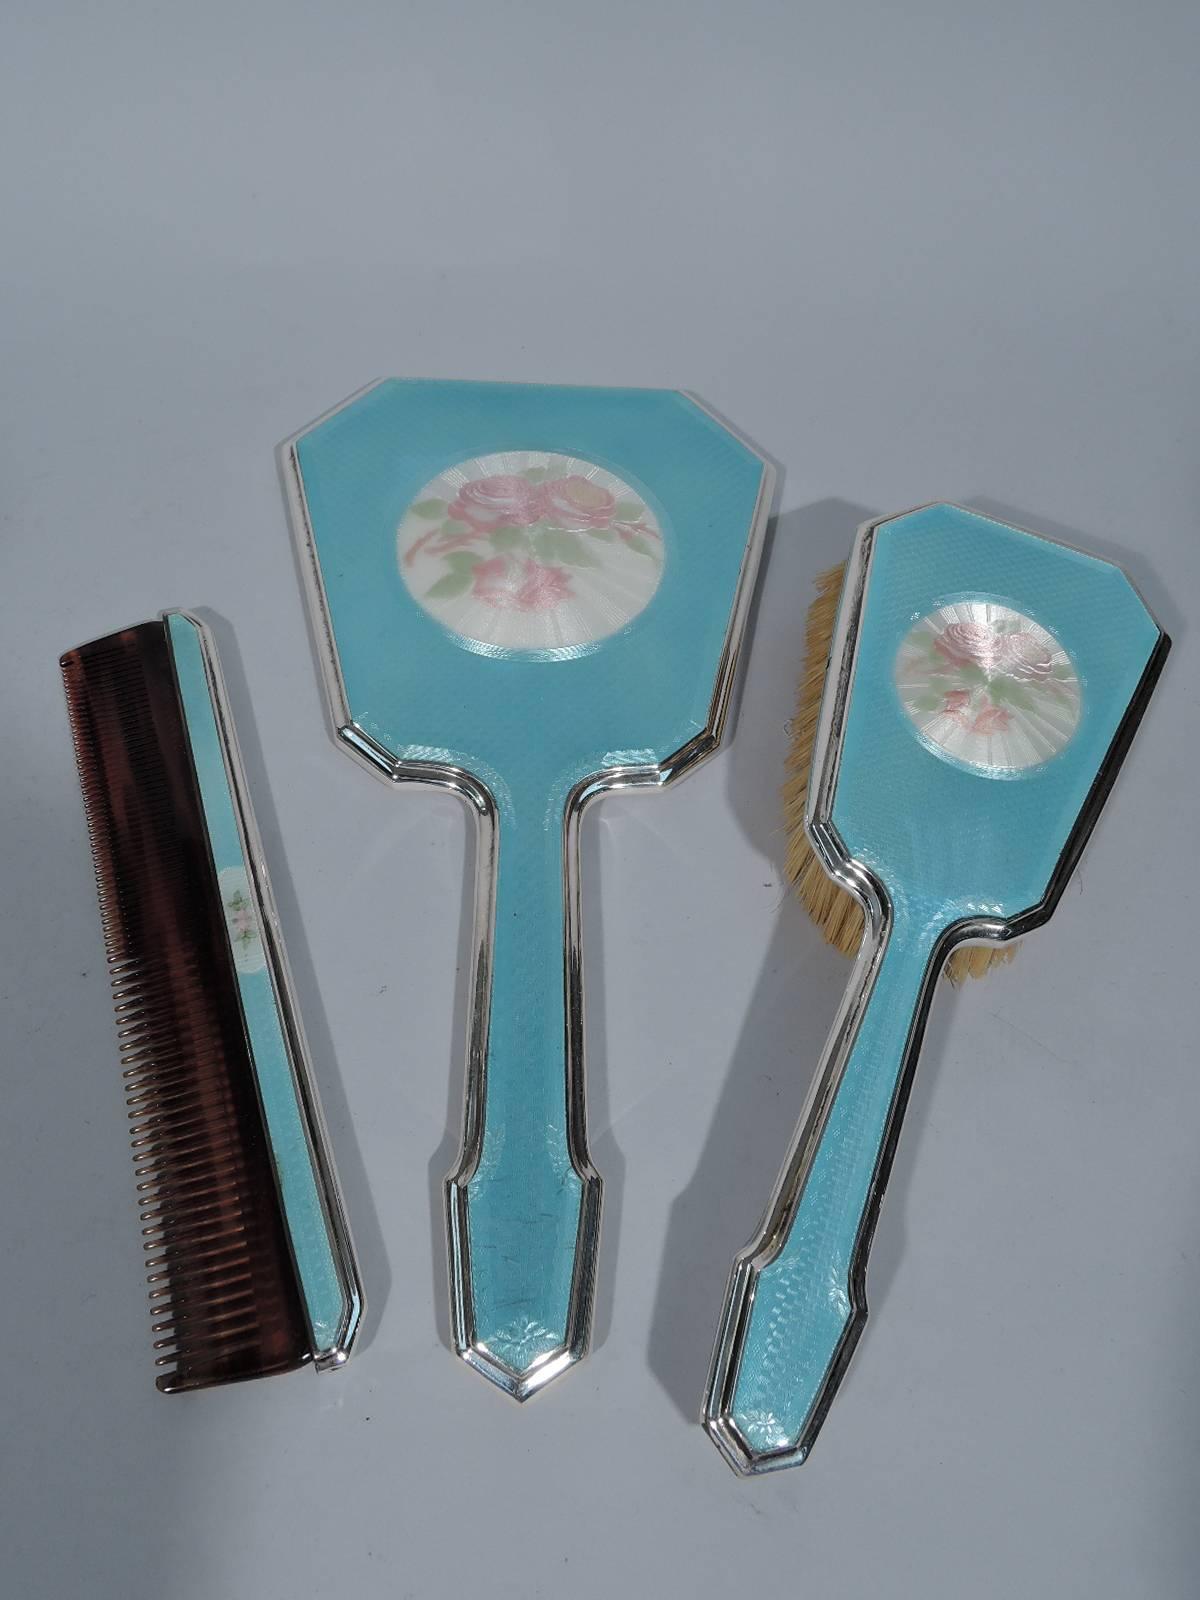 Pretty sterling silver, enamel, and glass vanity set. Made by Foster & Bailey in Providence, circa 1928. This set comprises hand mirror, hair brush, comb, powder jar, and rouge pot.

All: Pink roses in radiating white frame on blue guilloche